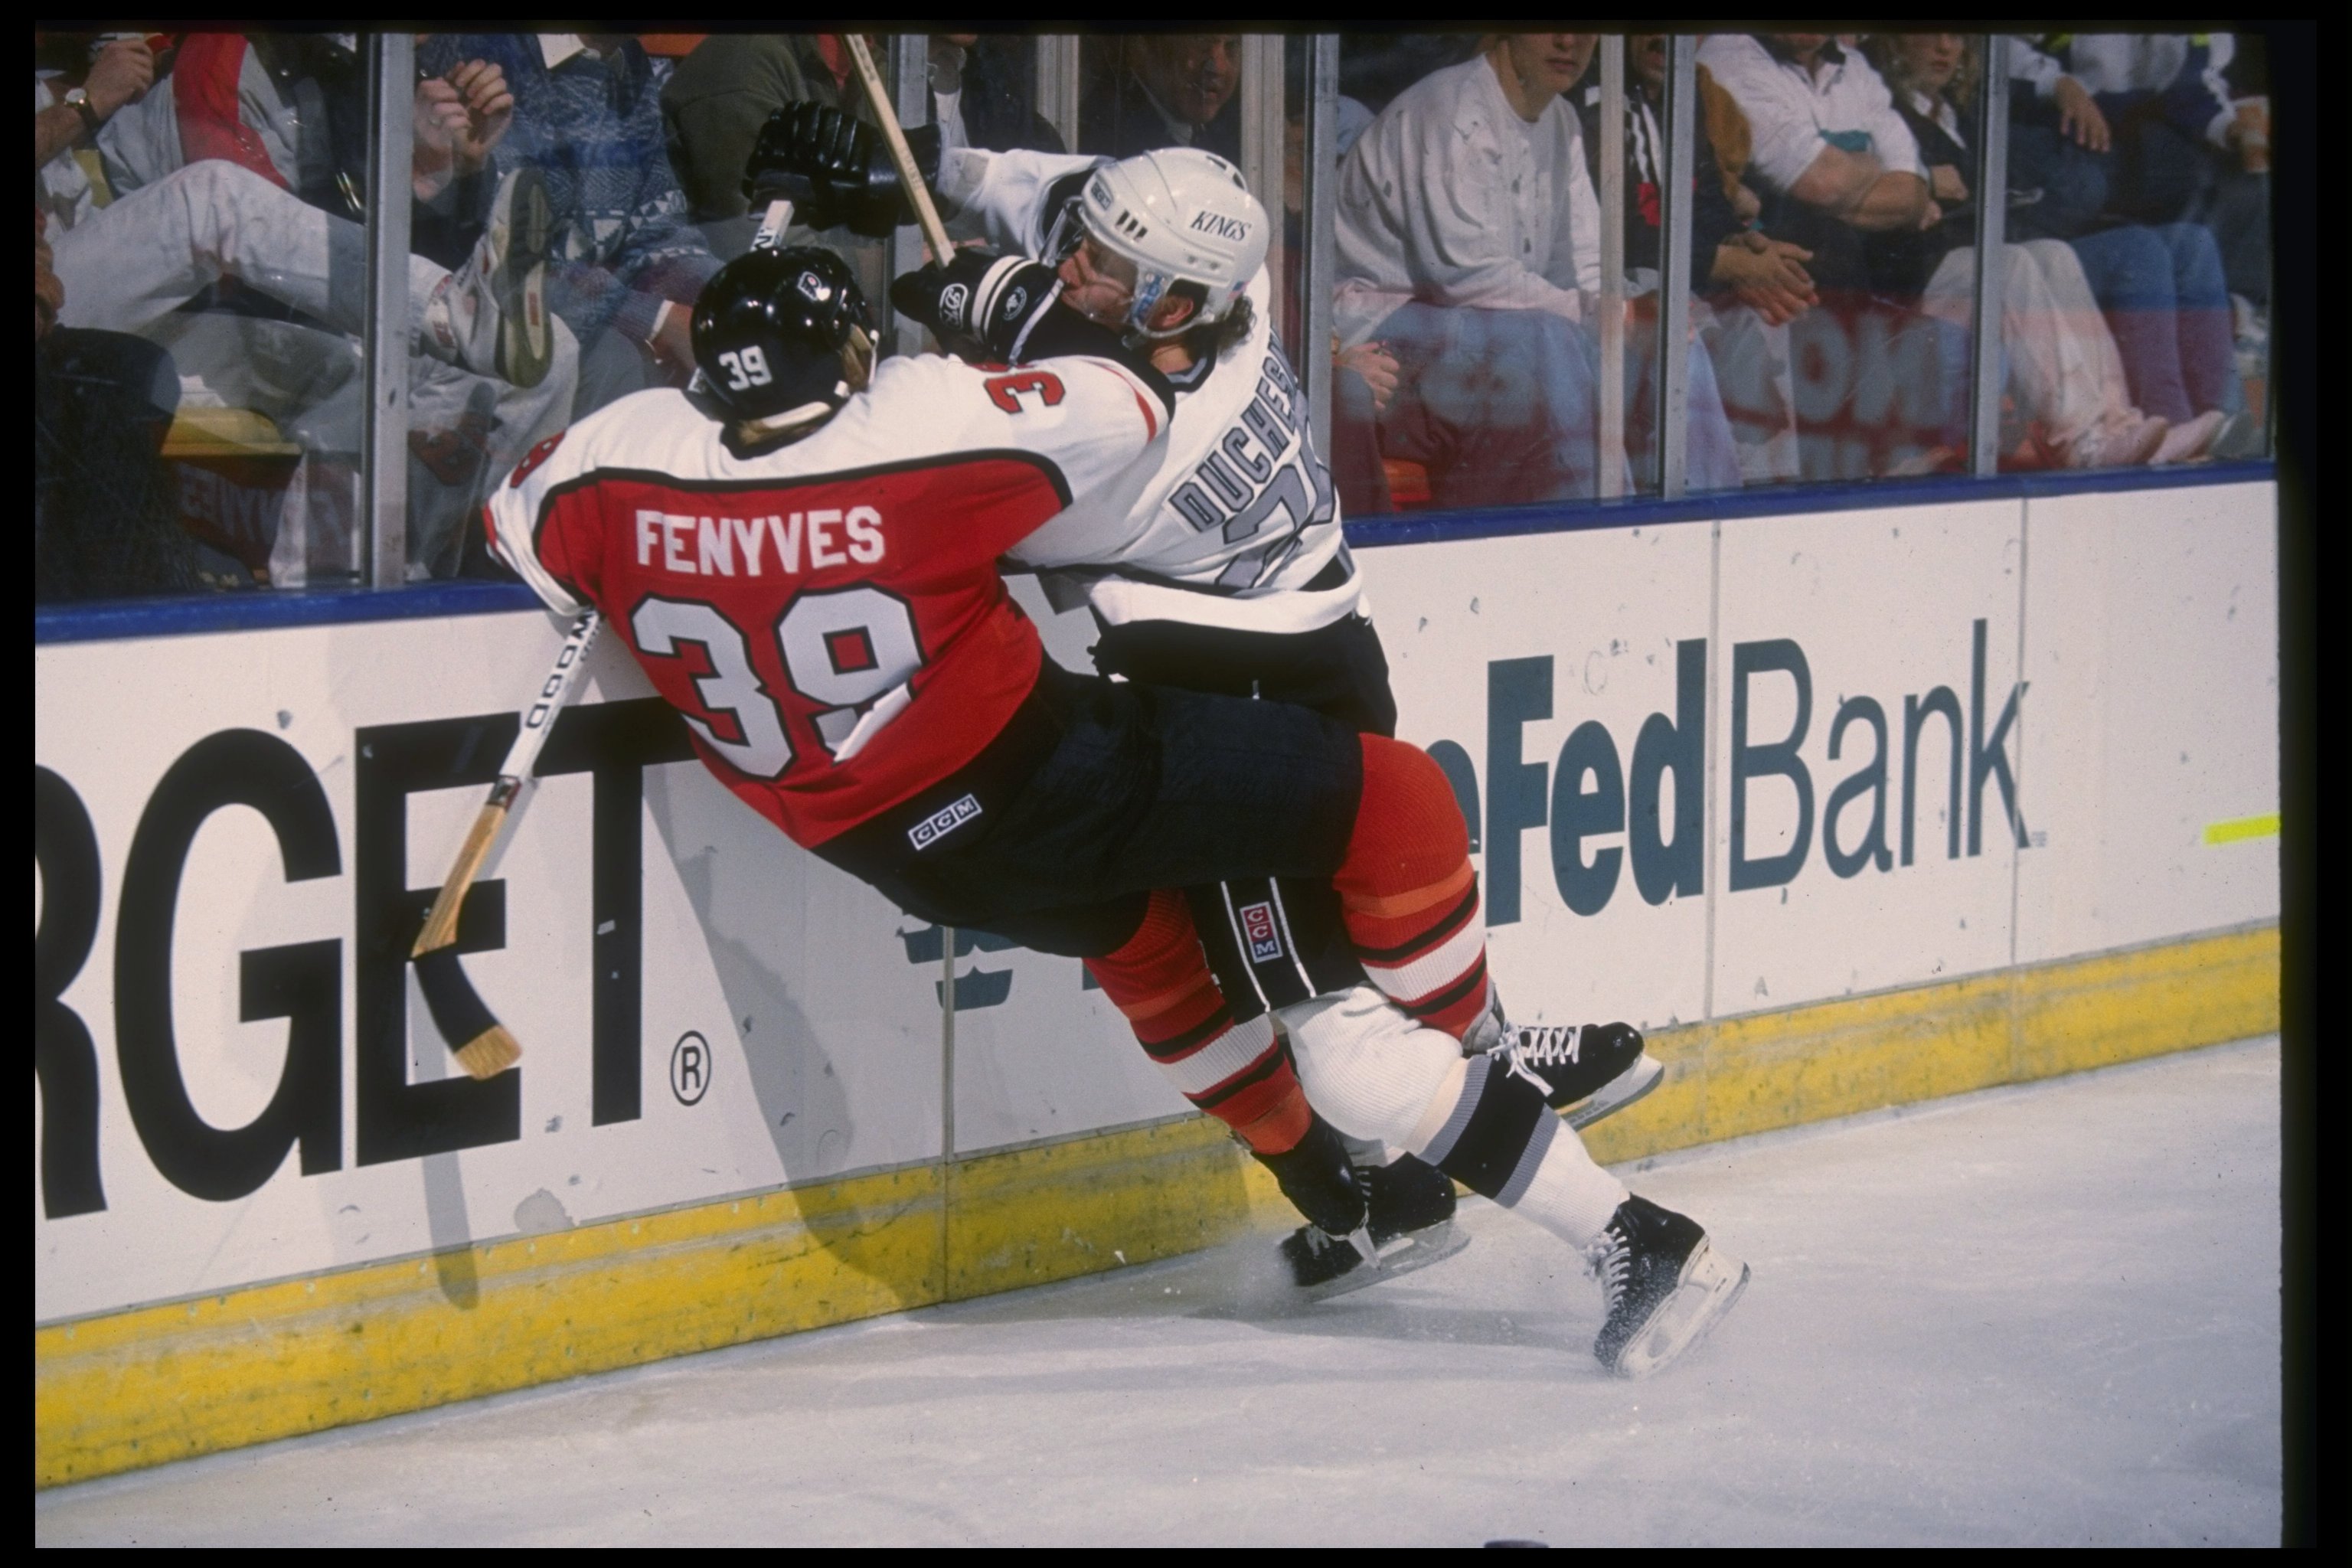 27 Dec 1990: Defenseman Steve Duchesne of the Los Angeles Kings and defenseman Dave Fenyves of the Philadelphia Flyers meet at the wall during a game at the Great Western Forum in Inglewood, California. The Flyers won the game, 7-5.